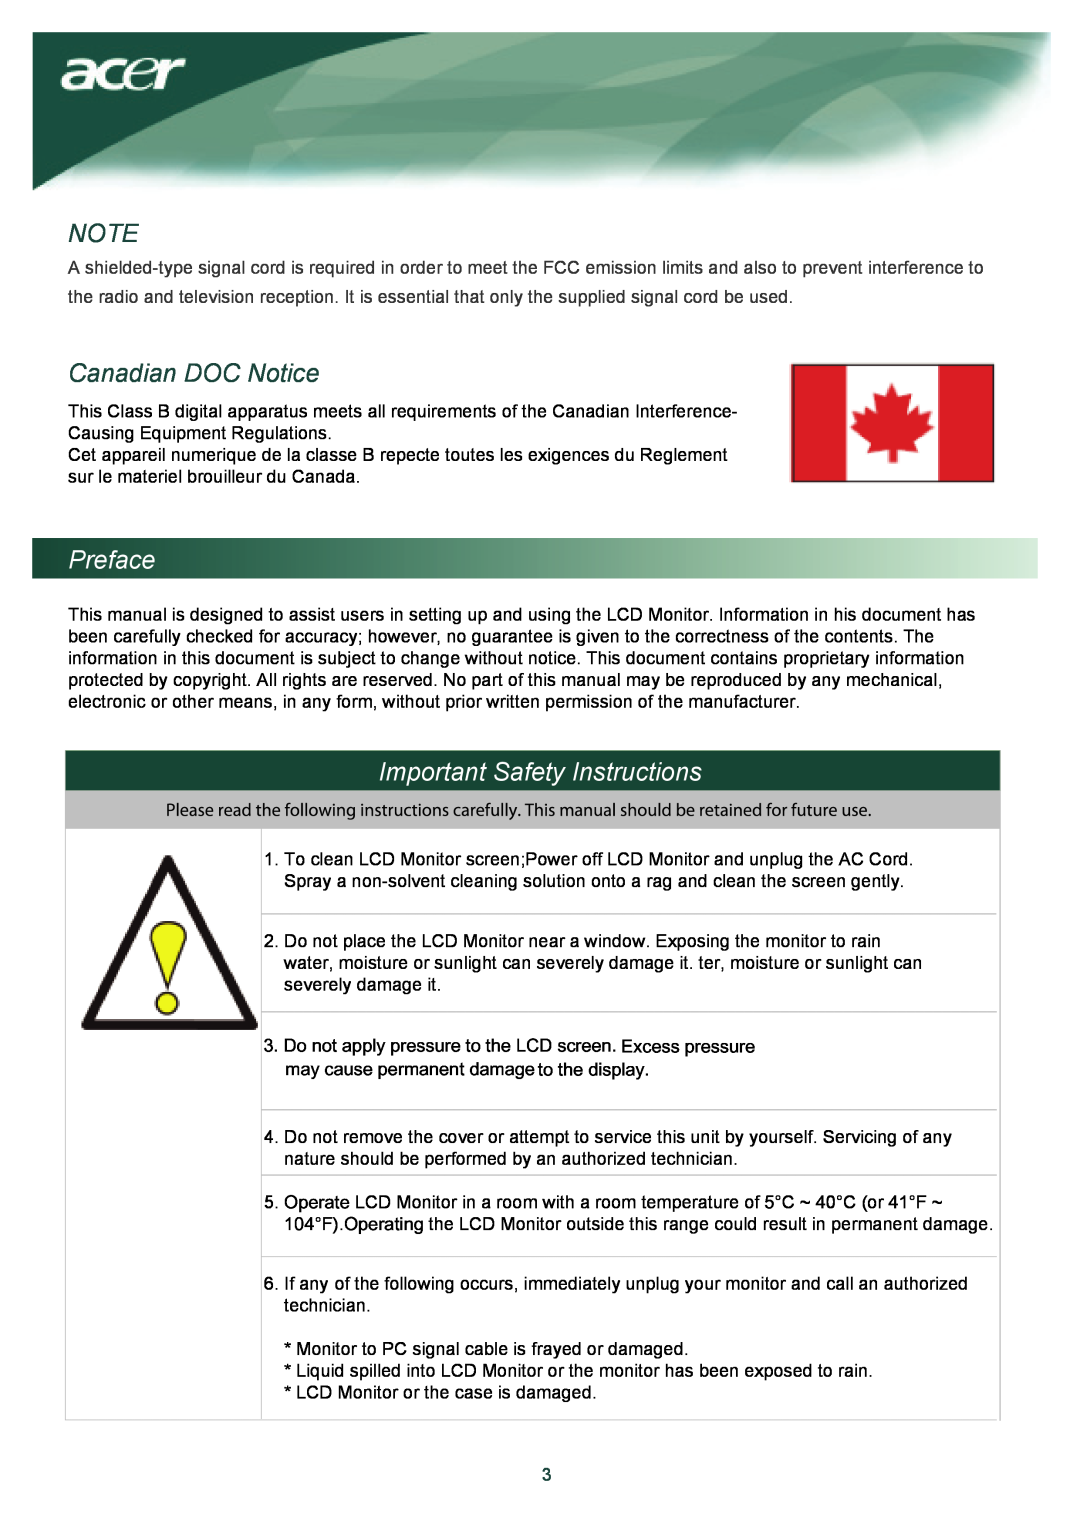 Acer TCO99 installation instructions Canadian DOC Notice, Preface, Important Safety Instructions 